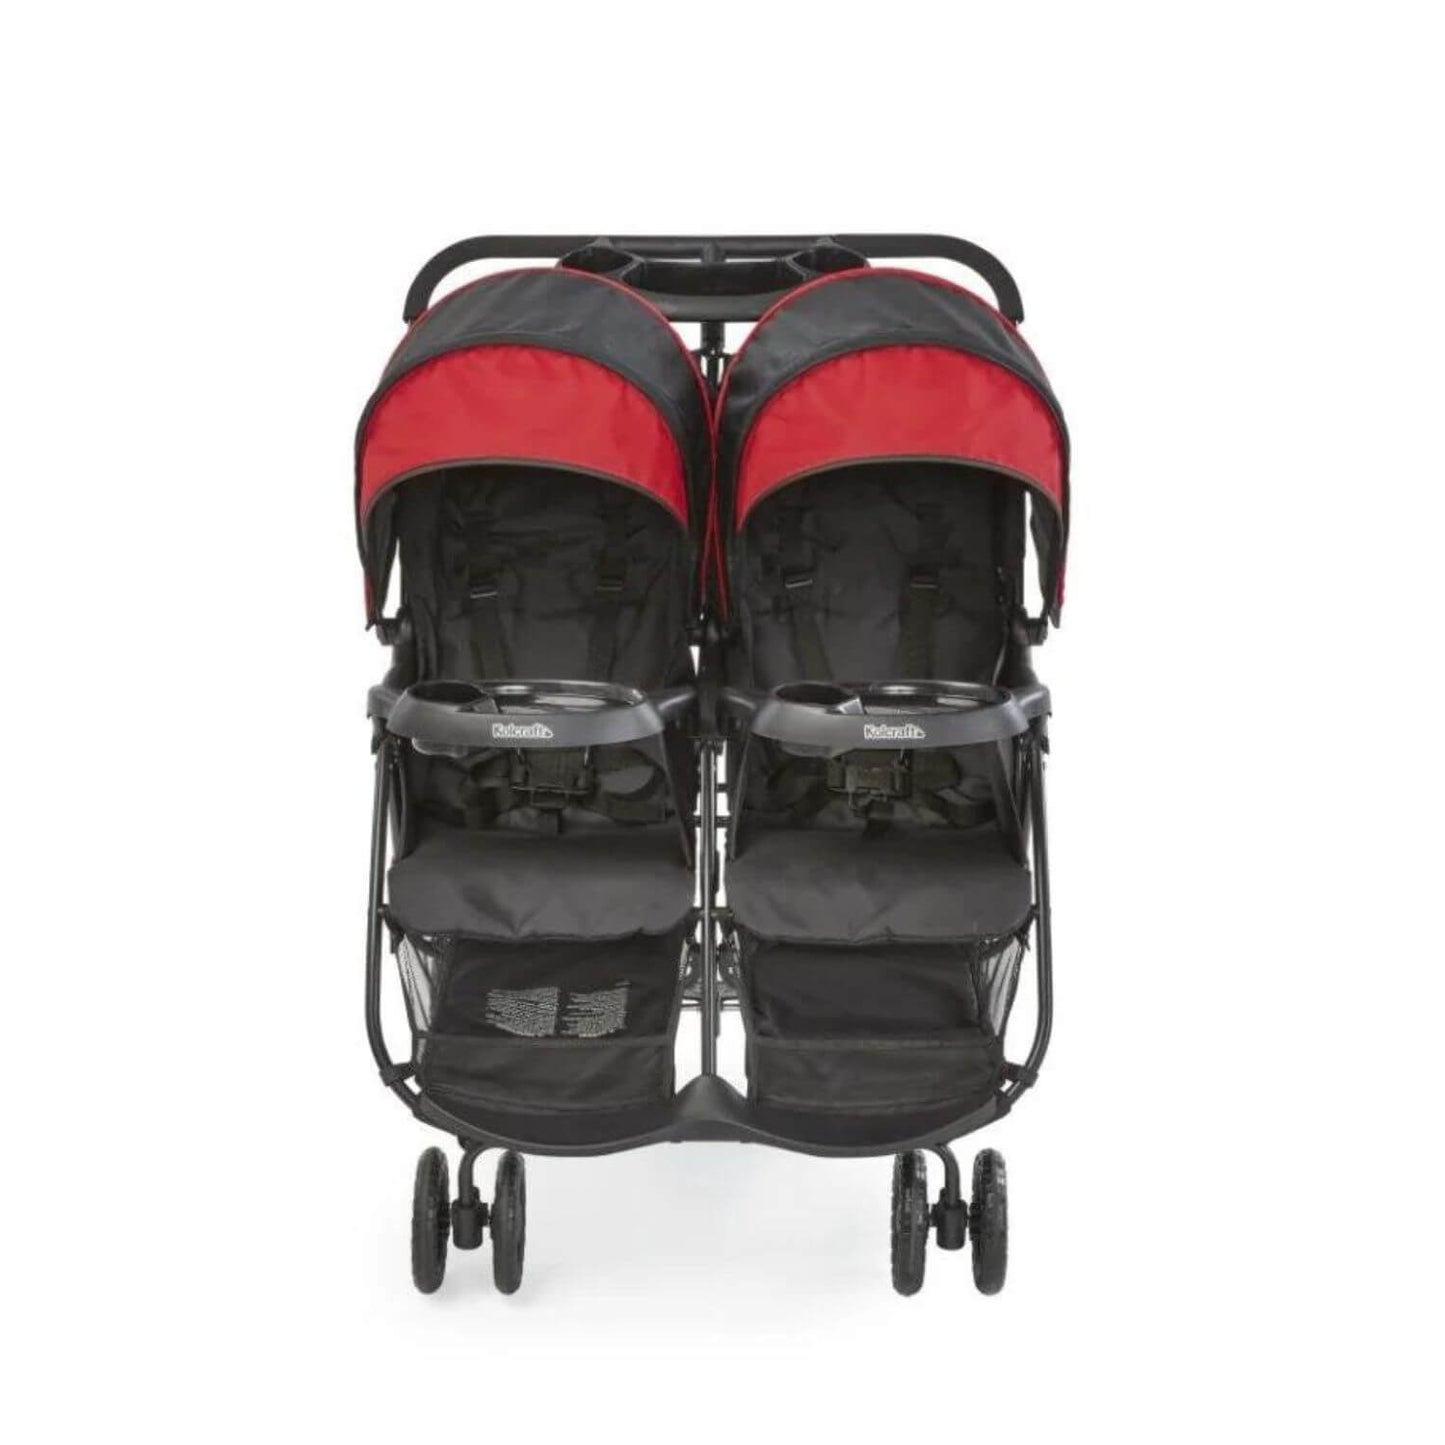 Kolcraft Cloud Plus Double Stroller - Front View of Product